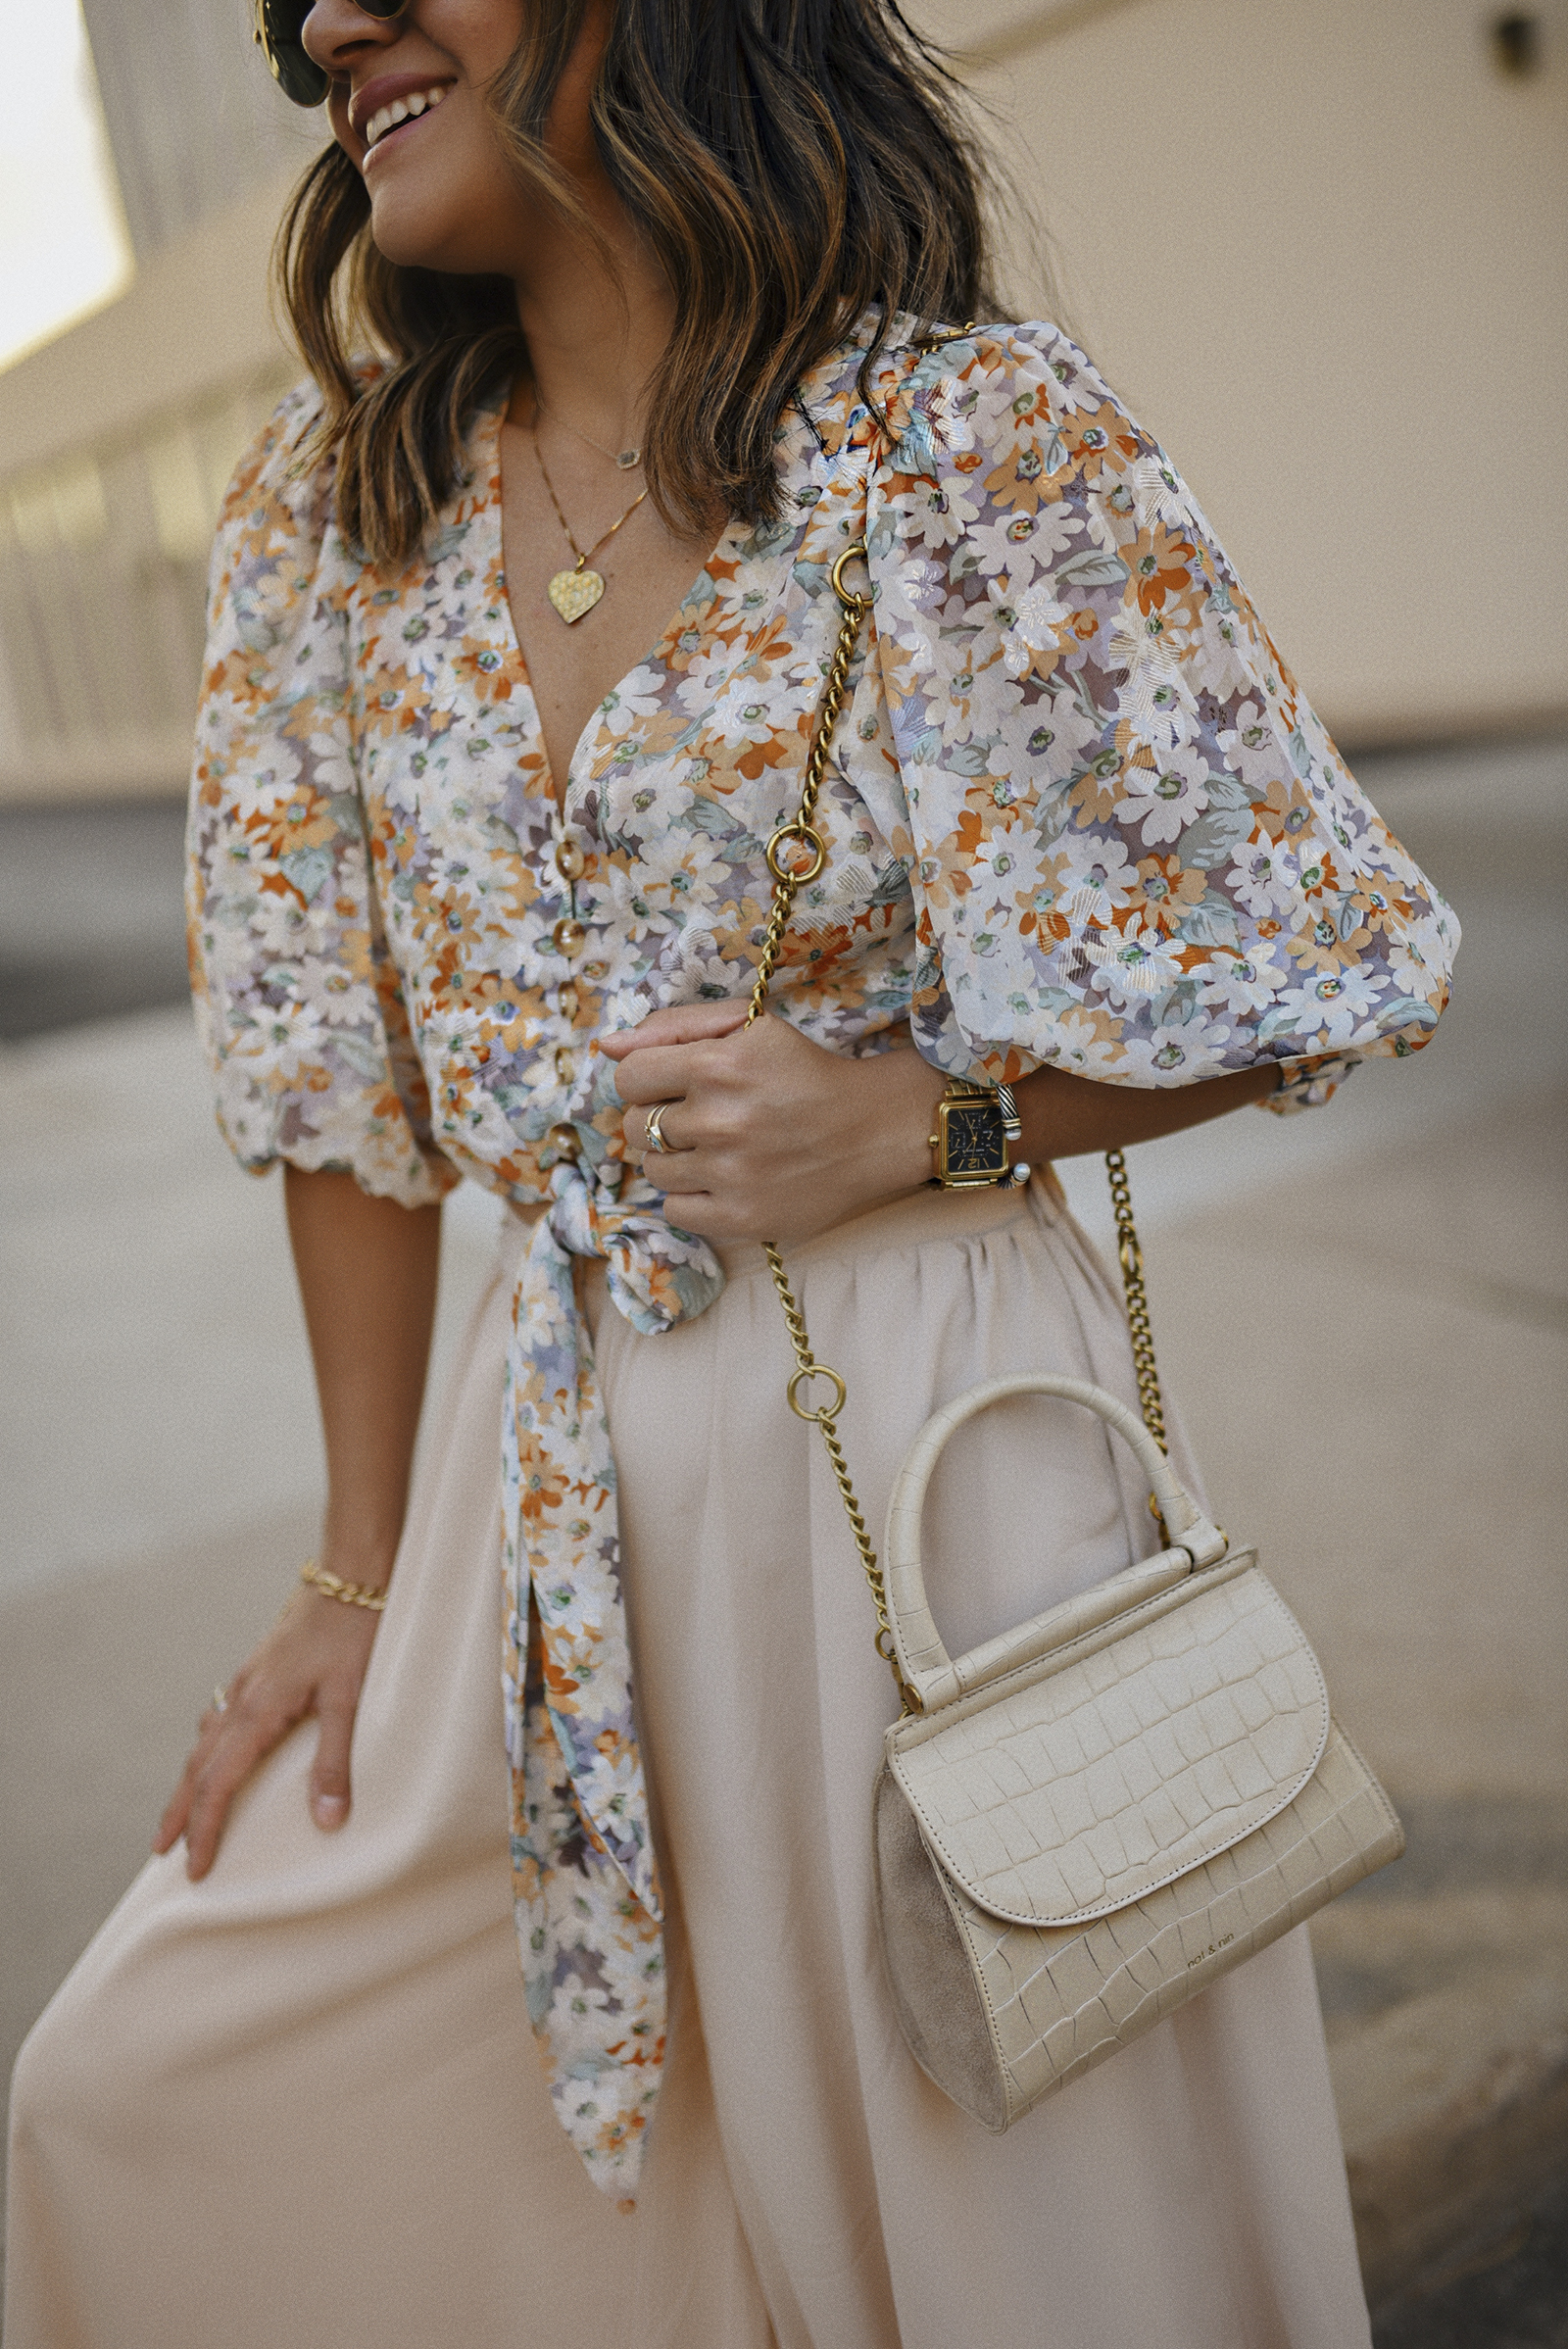 Carolina Hellal of Chic Talk wearing a Chicwish Floral front tie top, nude wide leg pants, Rayban sunglasses, Urban Outfitters sandals and Nat & Nin beige crosssbody bag.